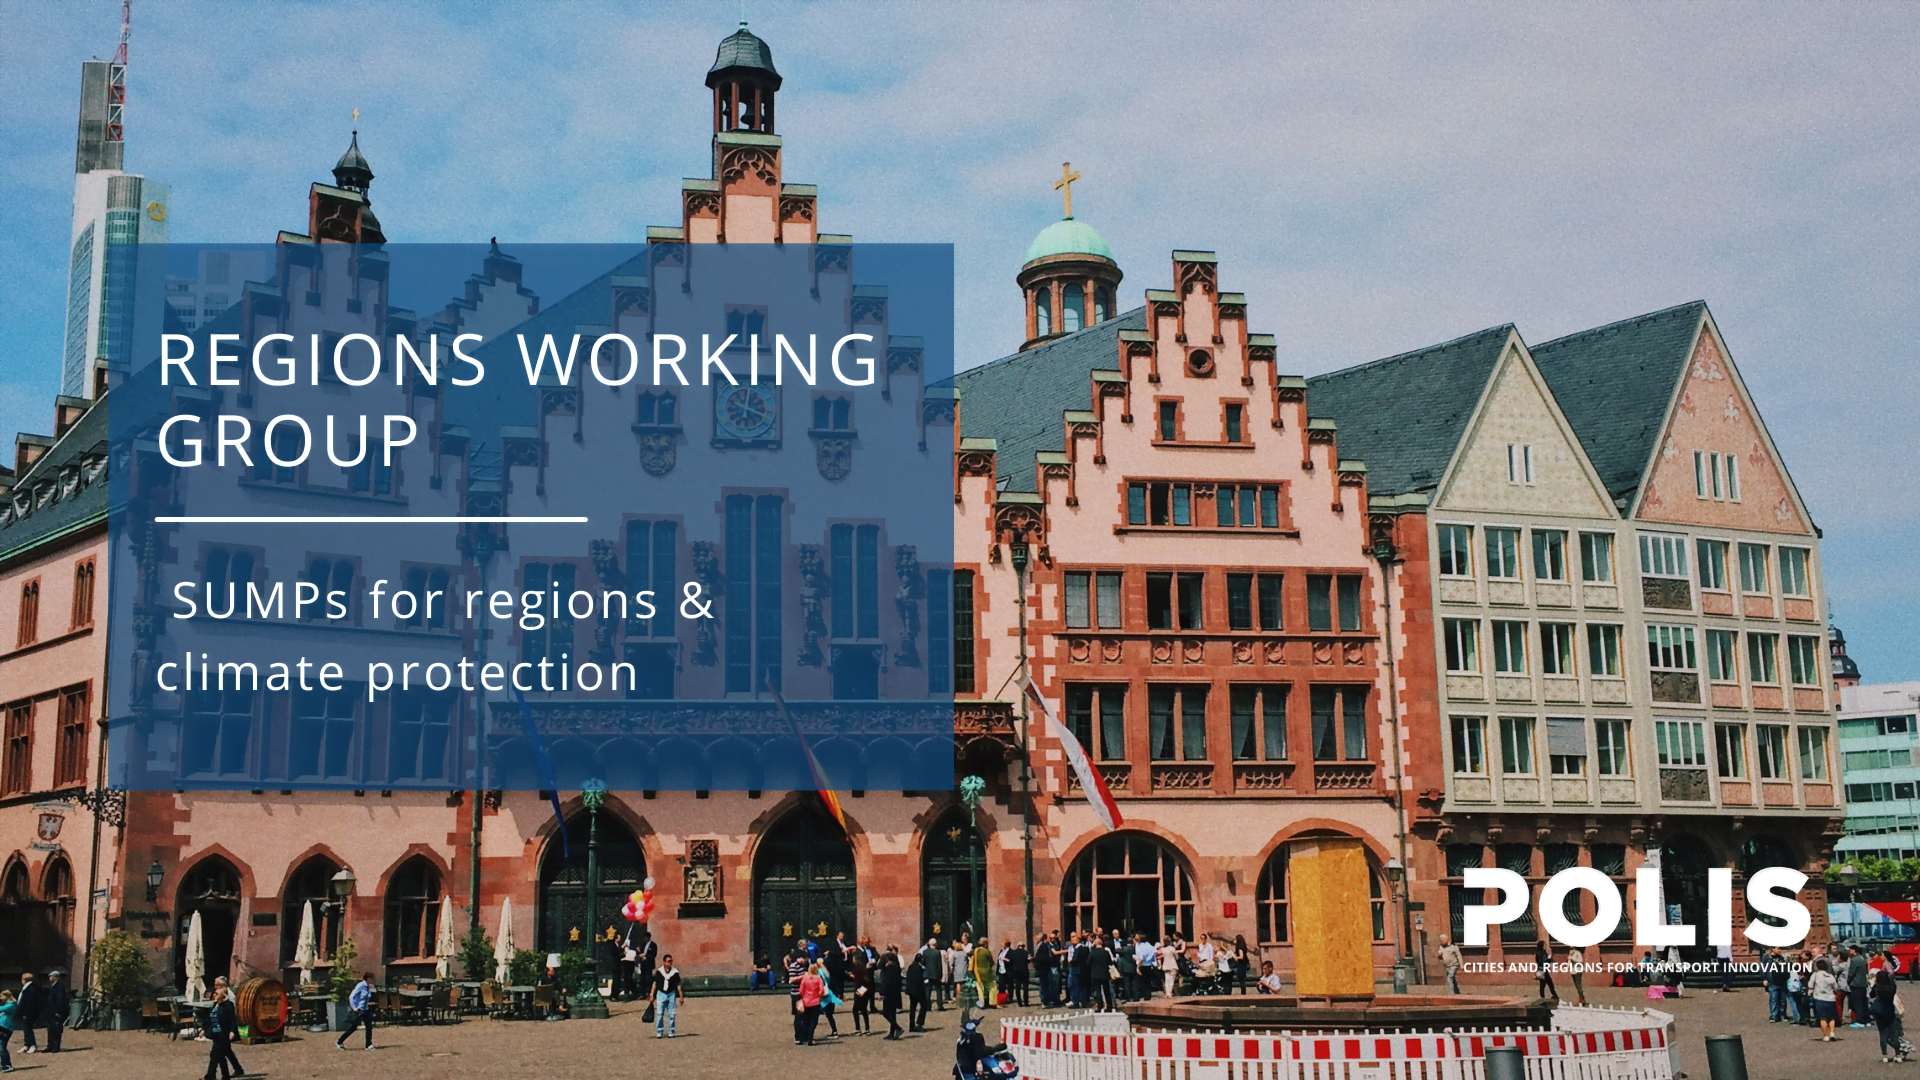 Regions working group meeting: Climate protection and regional SUMPs